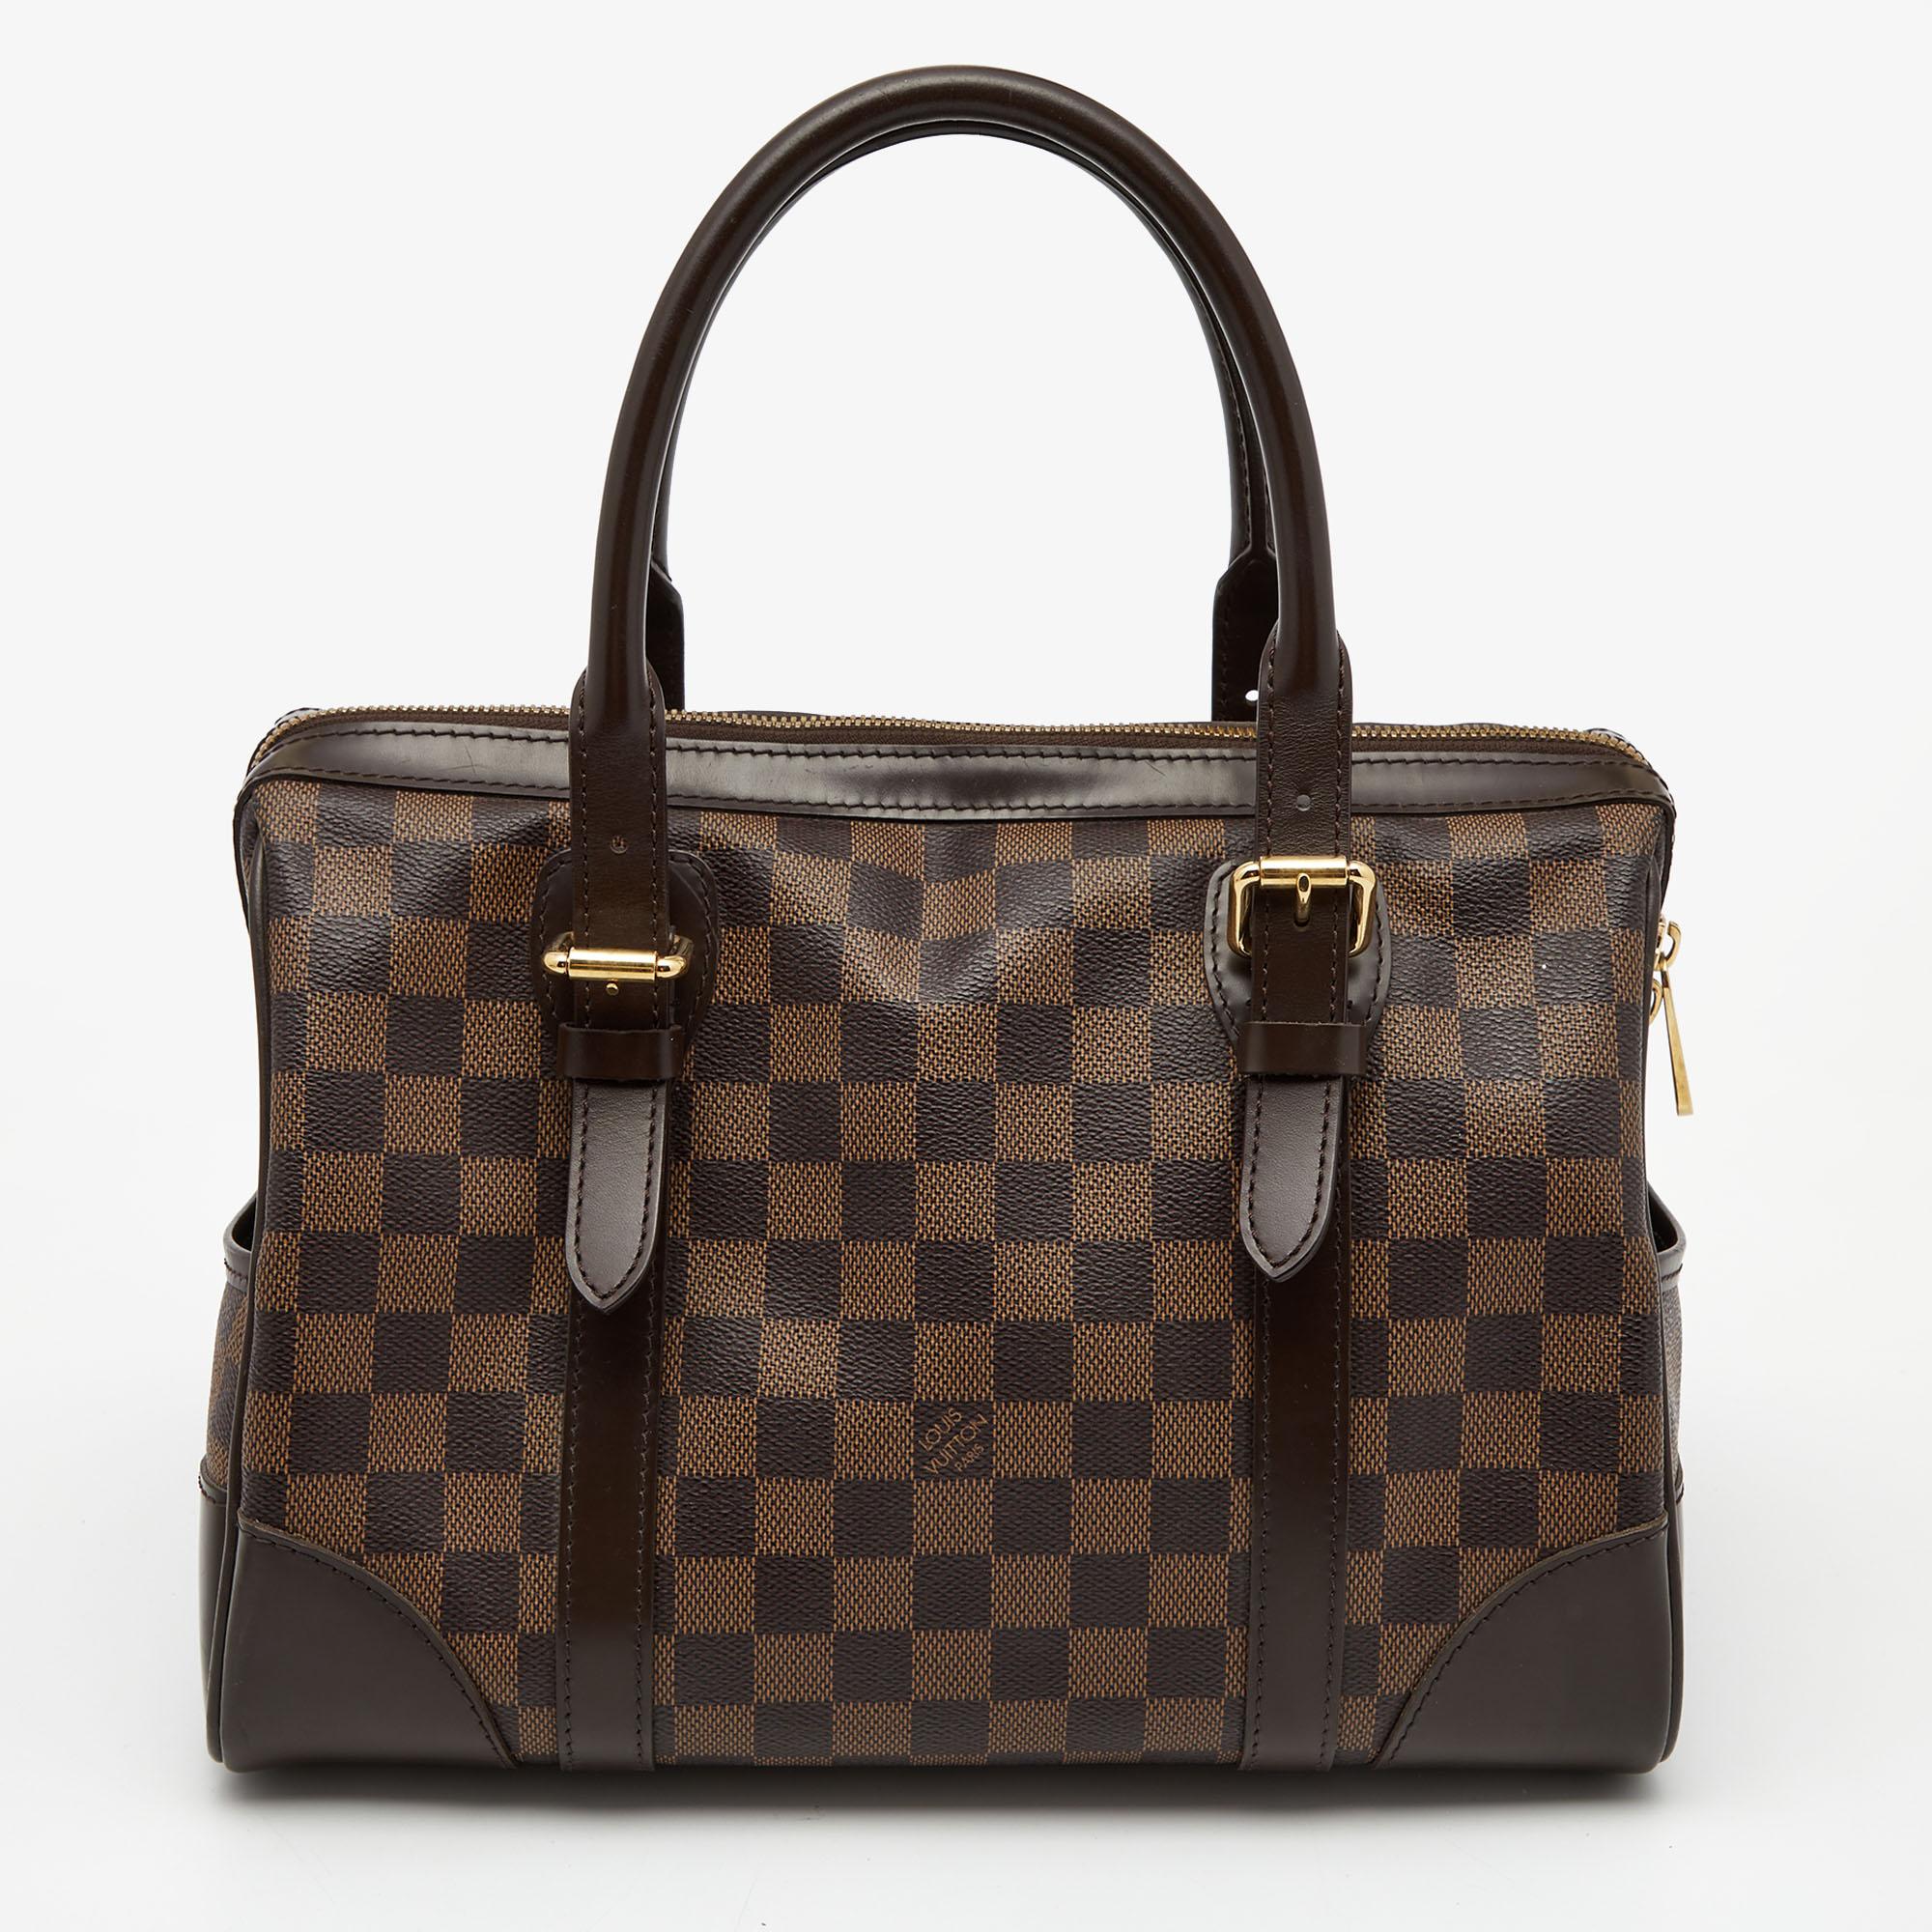 Combining Louis Vuitton’s rich heritage with exquisite craftsmanship, this Berkeley bag is one you shouldn't miss. Made from signature Damier Ebene canvas, this fabulous style is finished with leather trims and two handles. The brand plaque on the